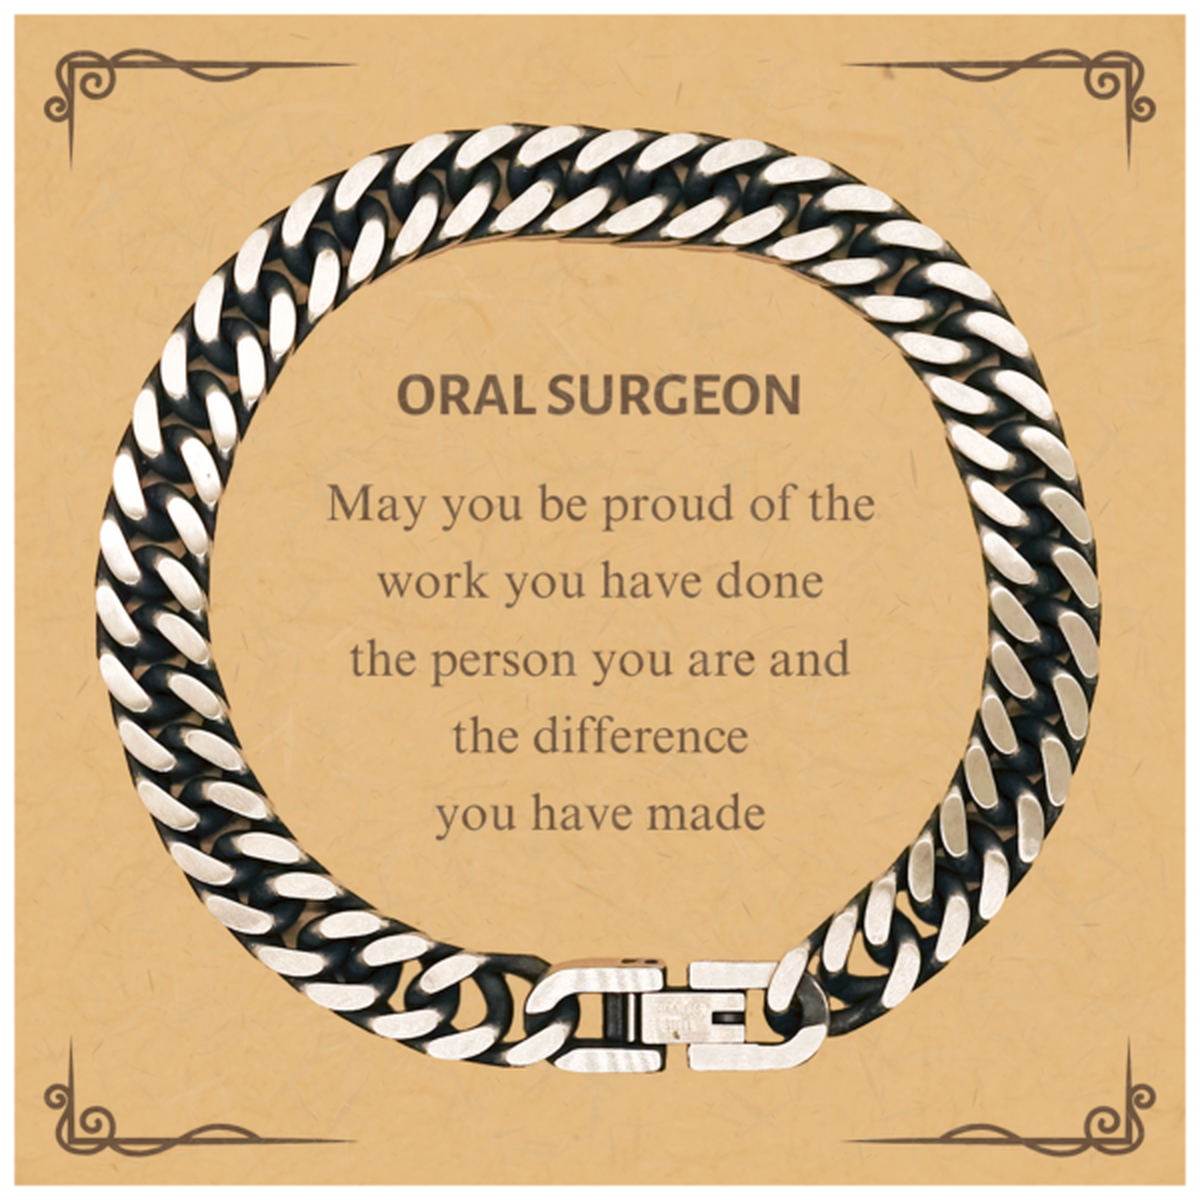 Oral Surgeon May you be proud of the work you have done, Retirement Oral Surgeon Cuban Link Chain Bracelet for Colleague Appreciation Gifts Amazing for Oral Surgeon